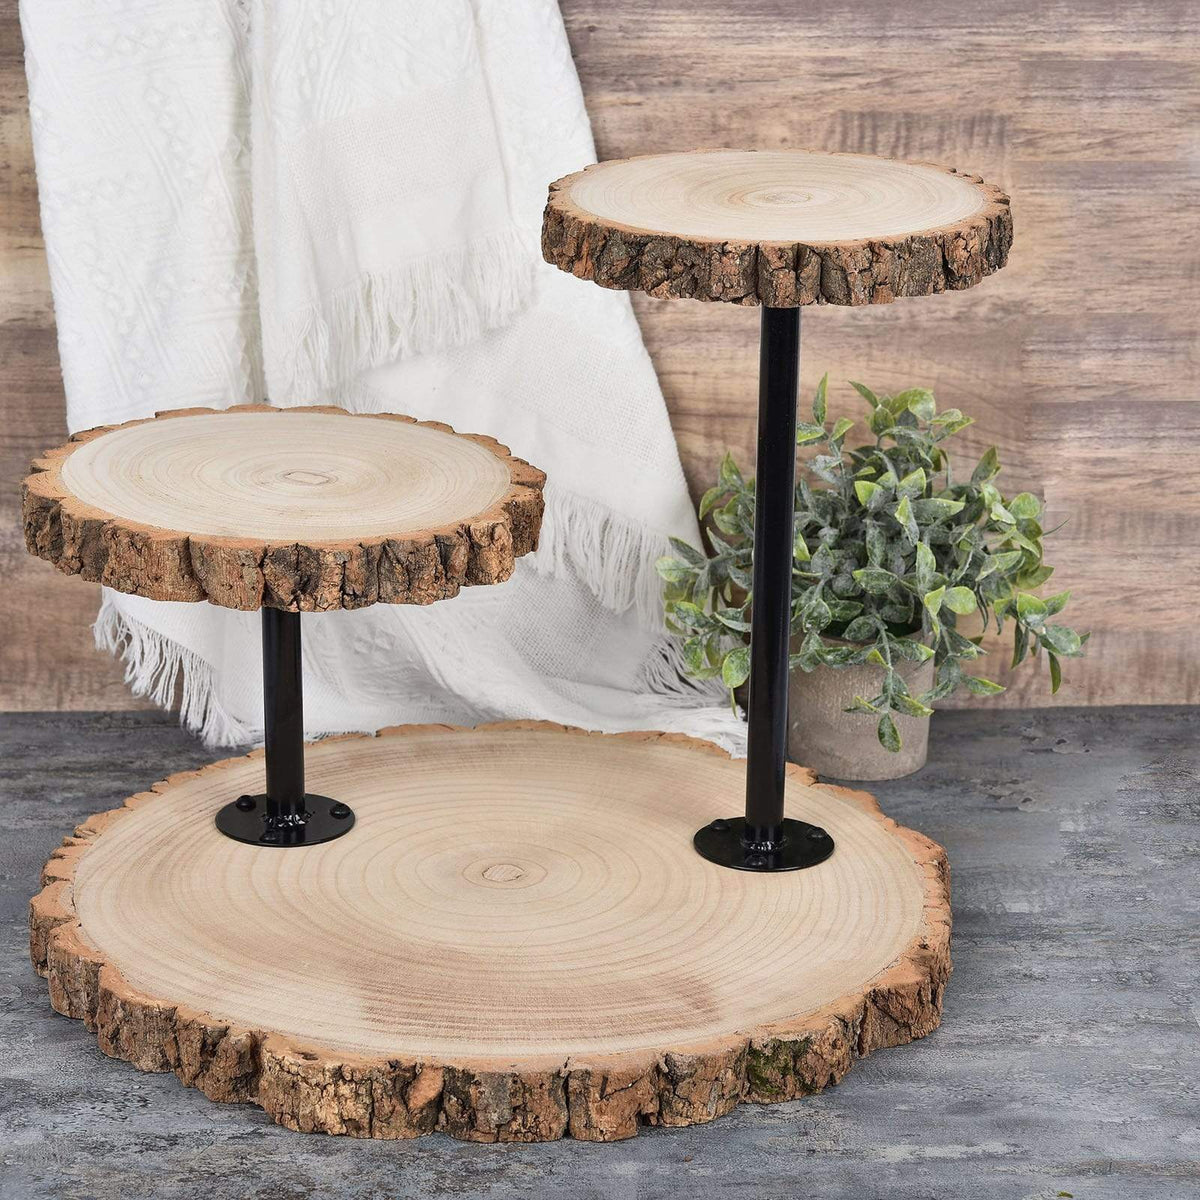 Balsacircle 14 inch 3 Tiers Brown Black Round Natural Wood Dessert Stand Wedding Party Catering Decorations